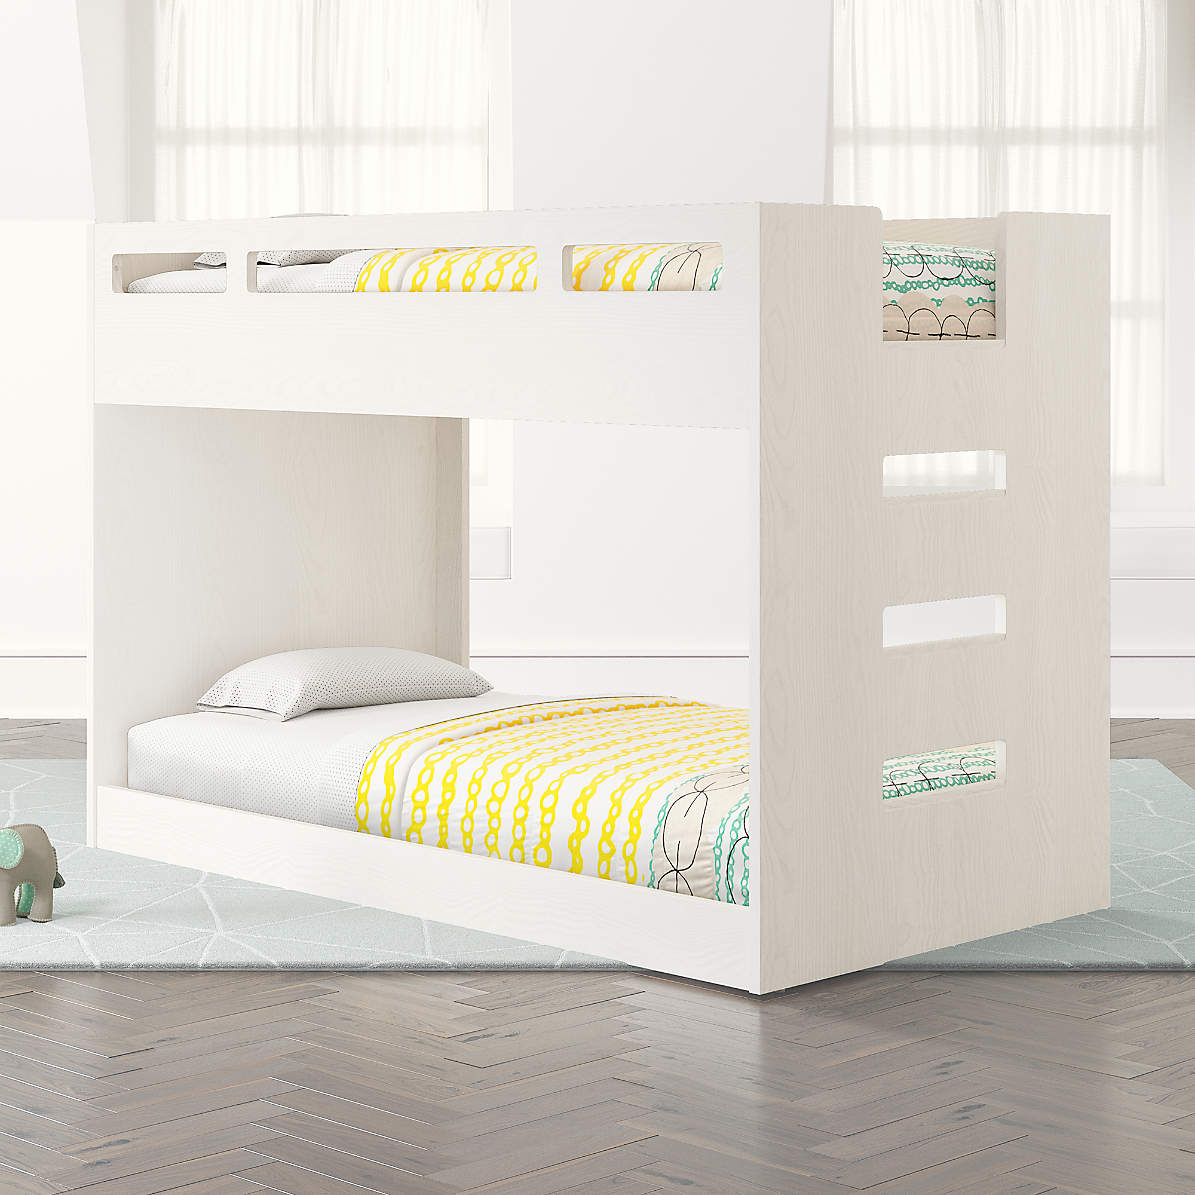 Abridged White Glaze Low Kids Twin Bunk, Can You Use A Regular Twin Mattress On Bunk Bed